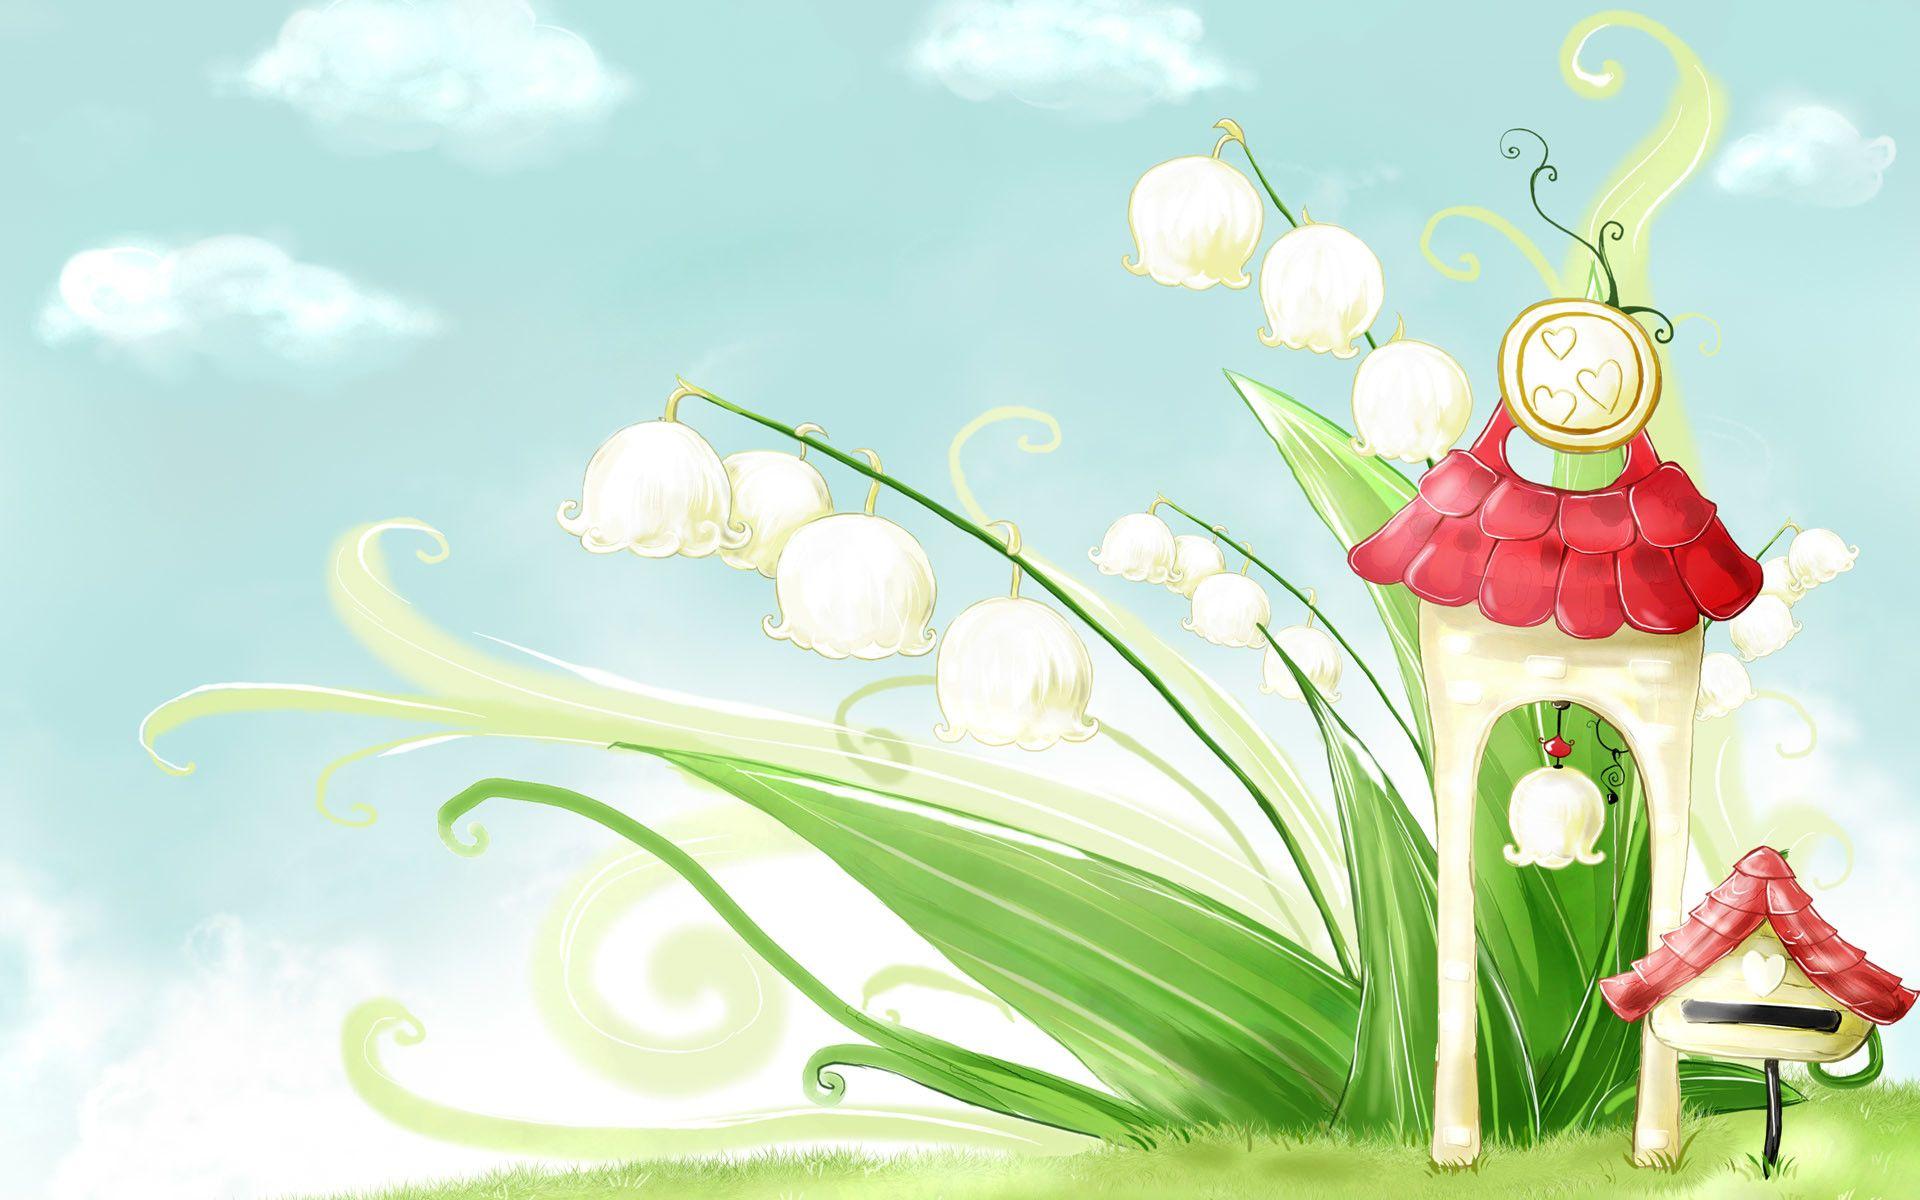 Wallpaper.wiki Cute Background Picture Free Download PIC WPD009667